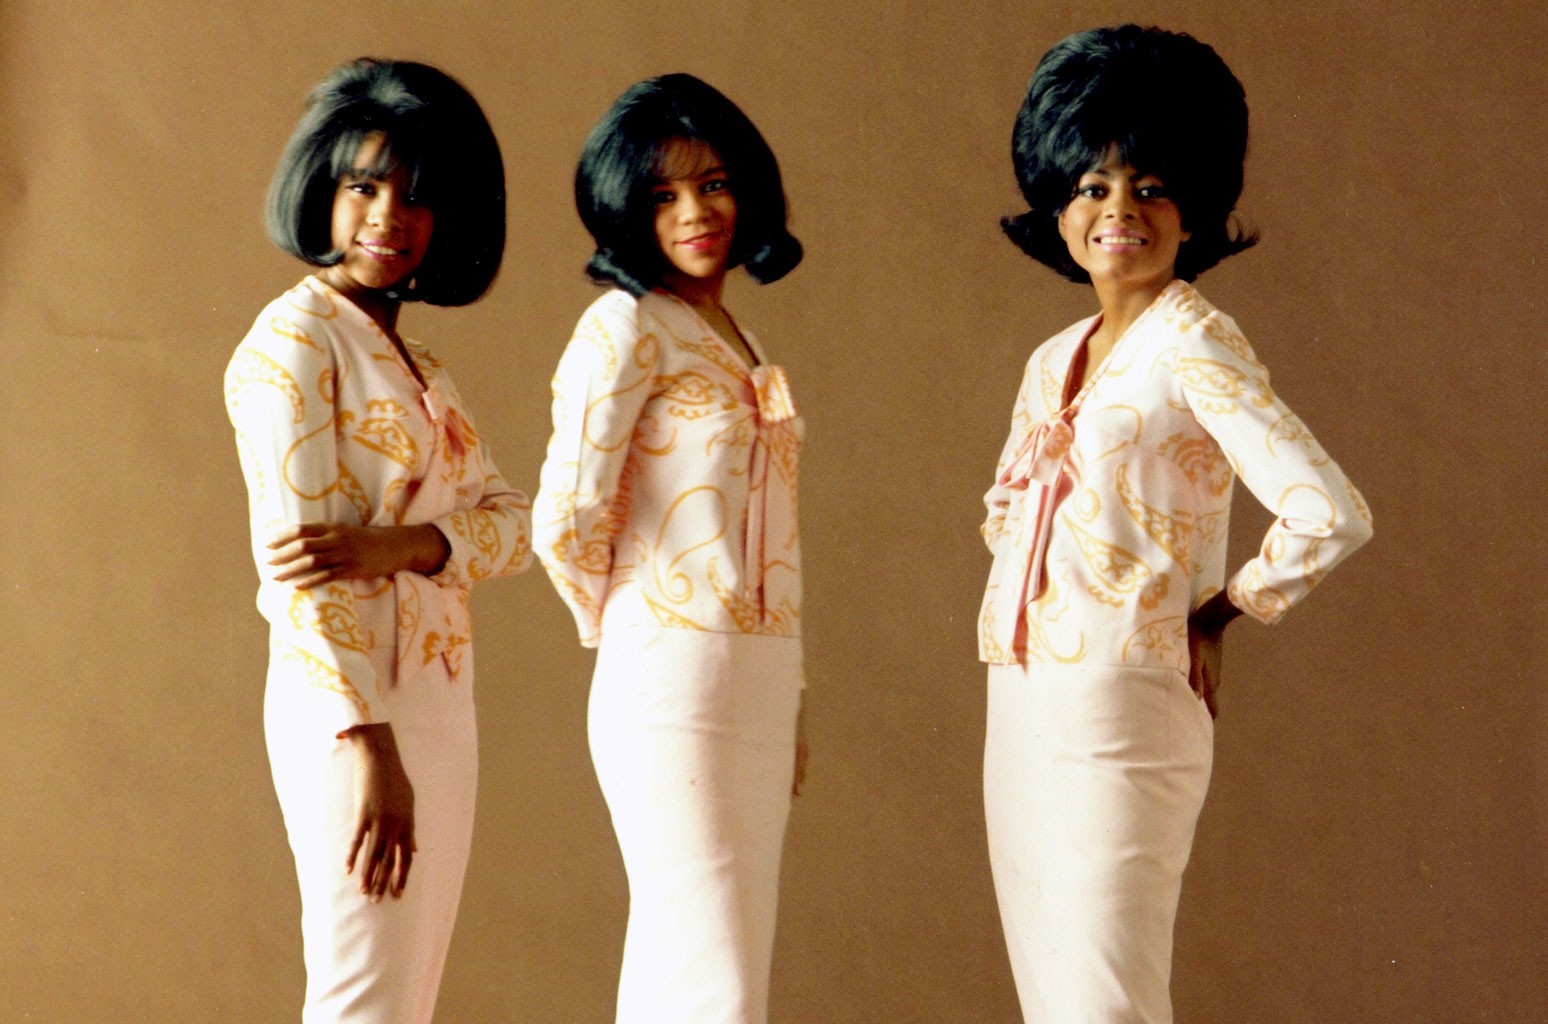 Image of "Mary Wilson," an Interview with Martha Reeves article